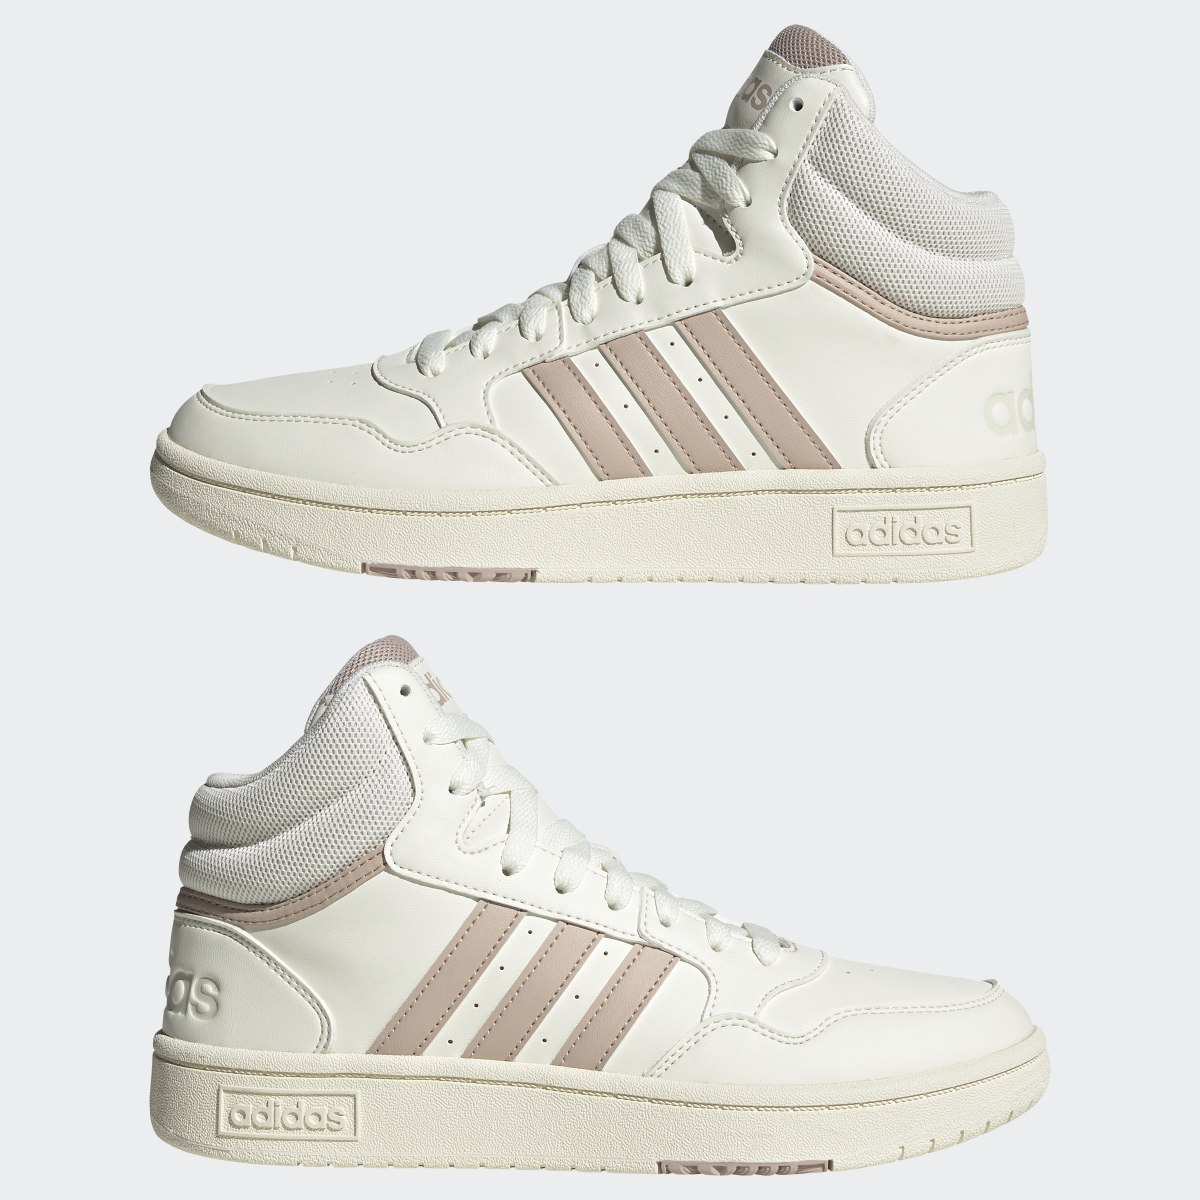 Adidas Hoops 3.0 Mid Classic Shoes. 8